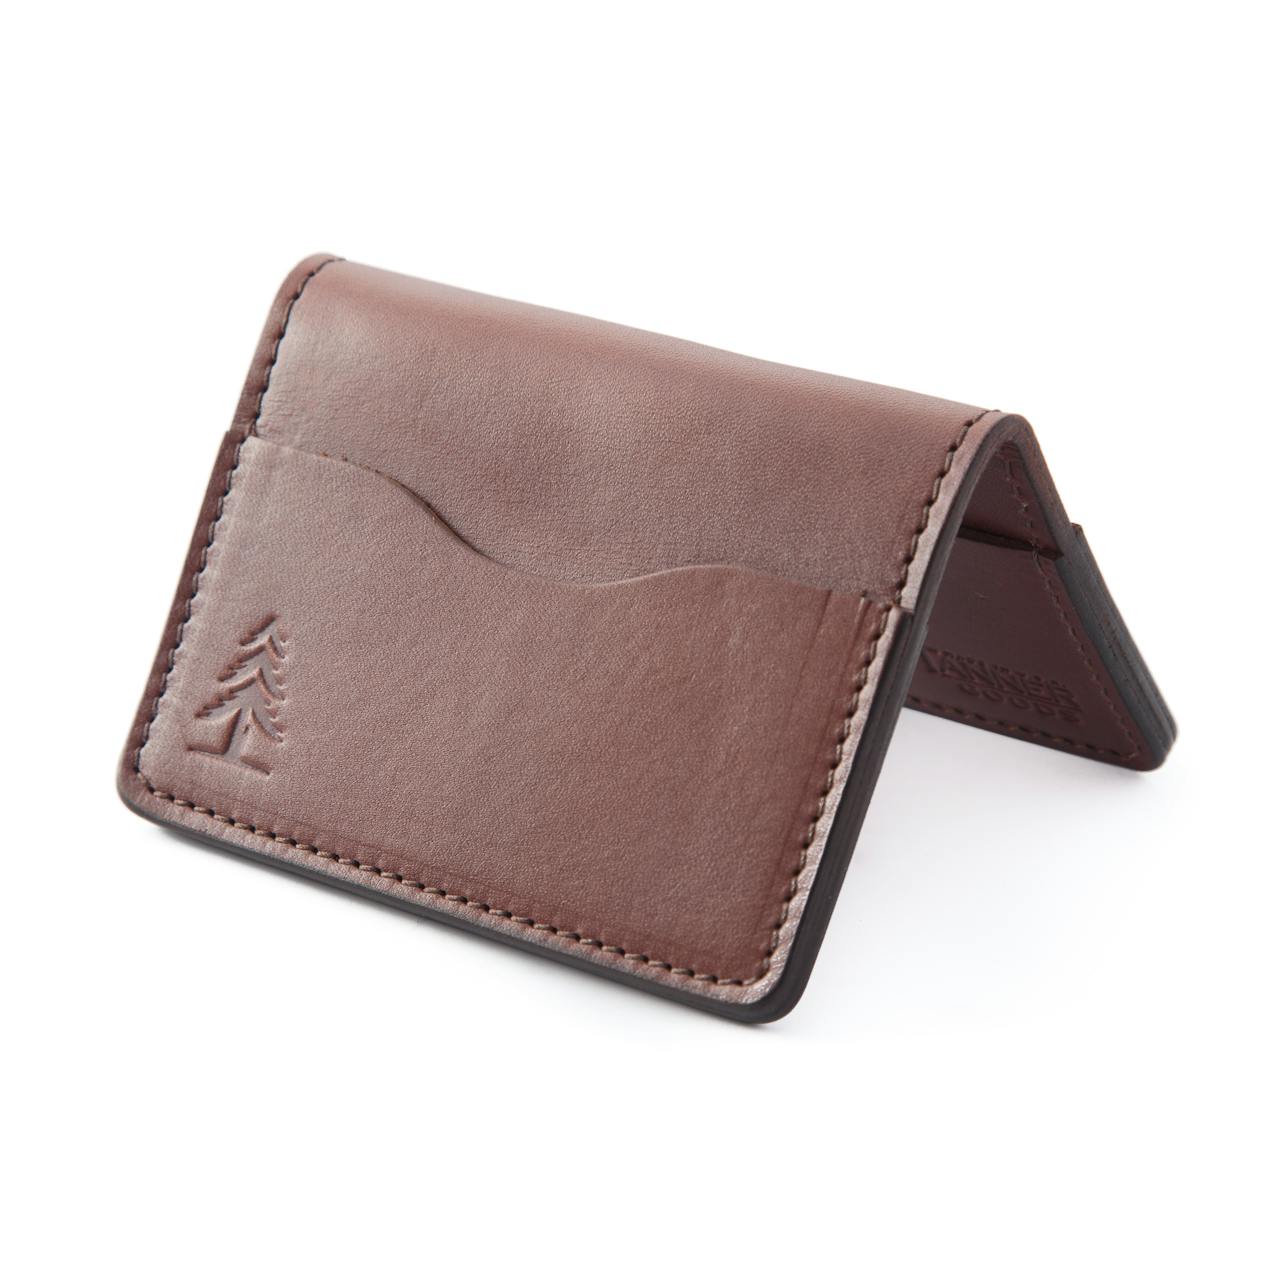 Tanner Goods Quad Wallet- Limited Edition